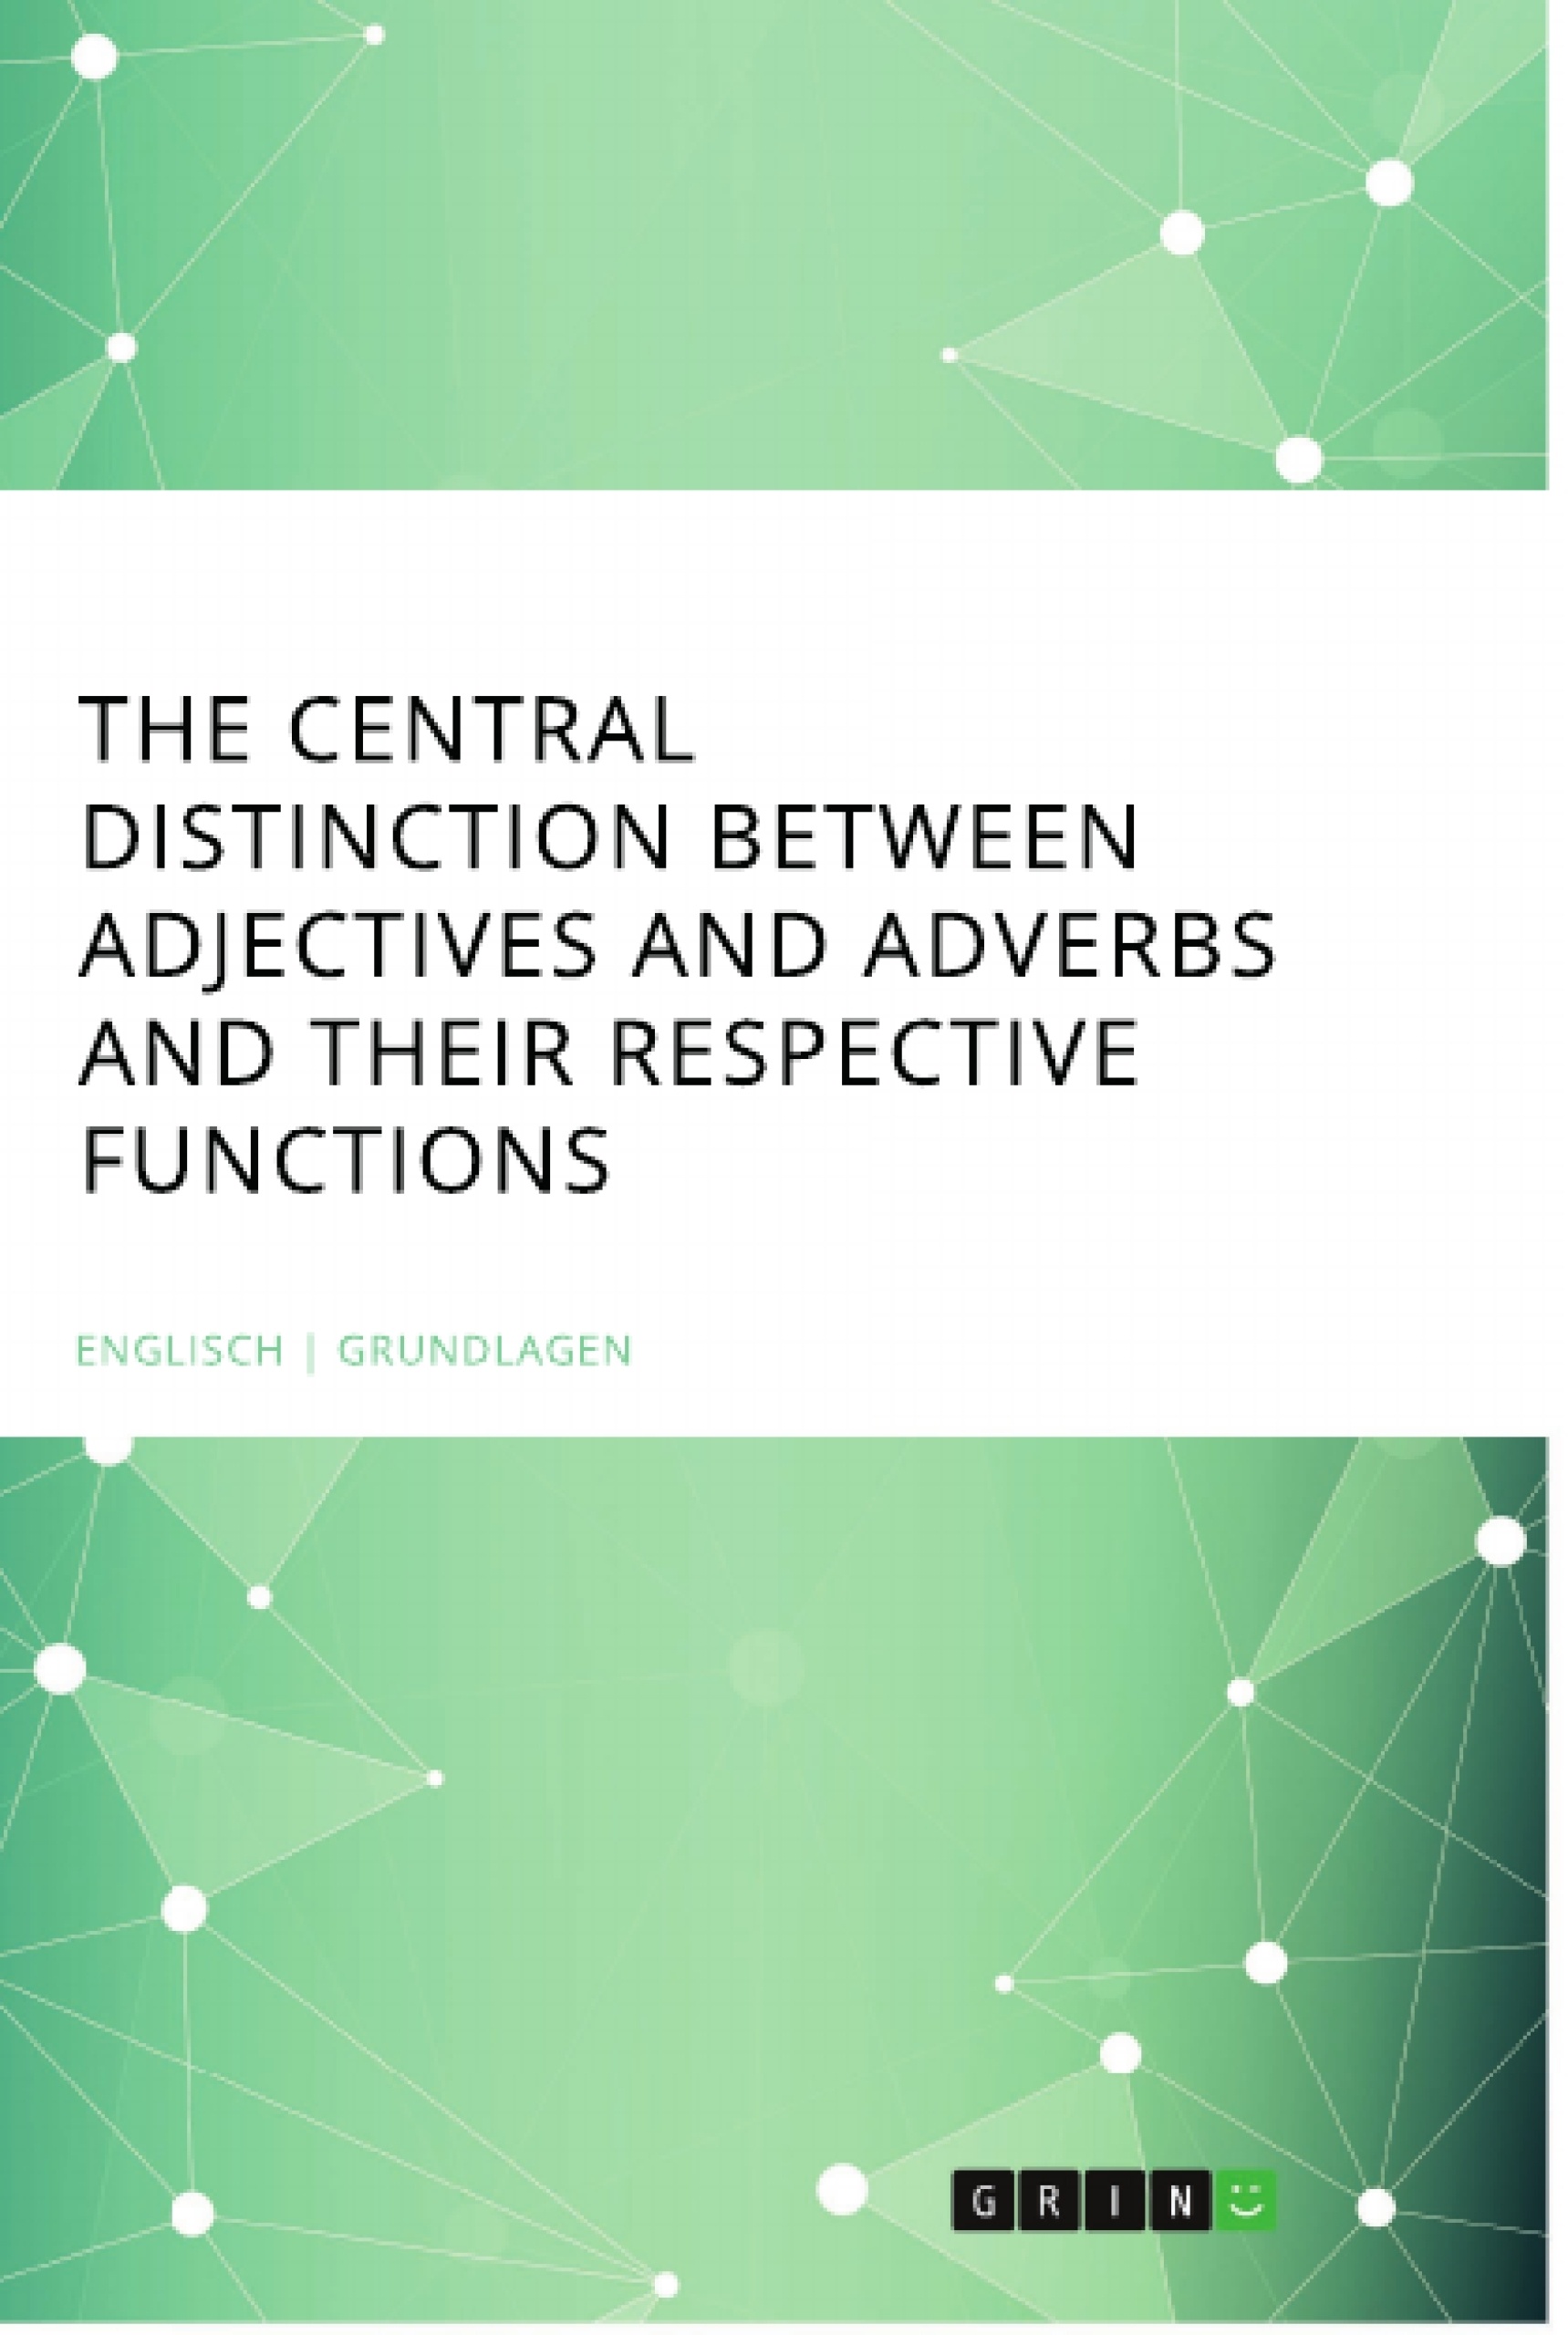 Title: The central Distinction between Adjectives and Adverbs and their respective Functions